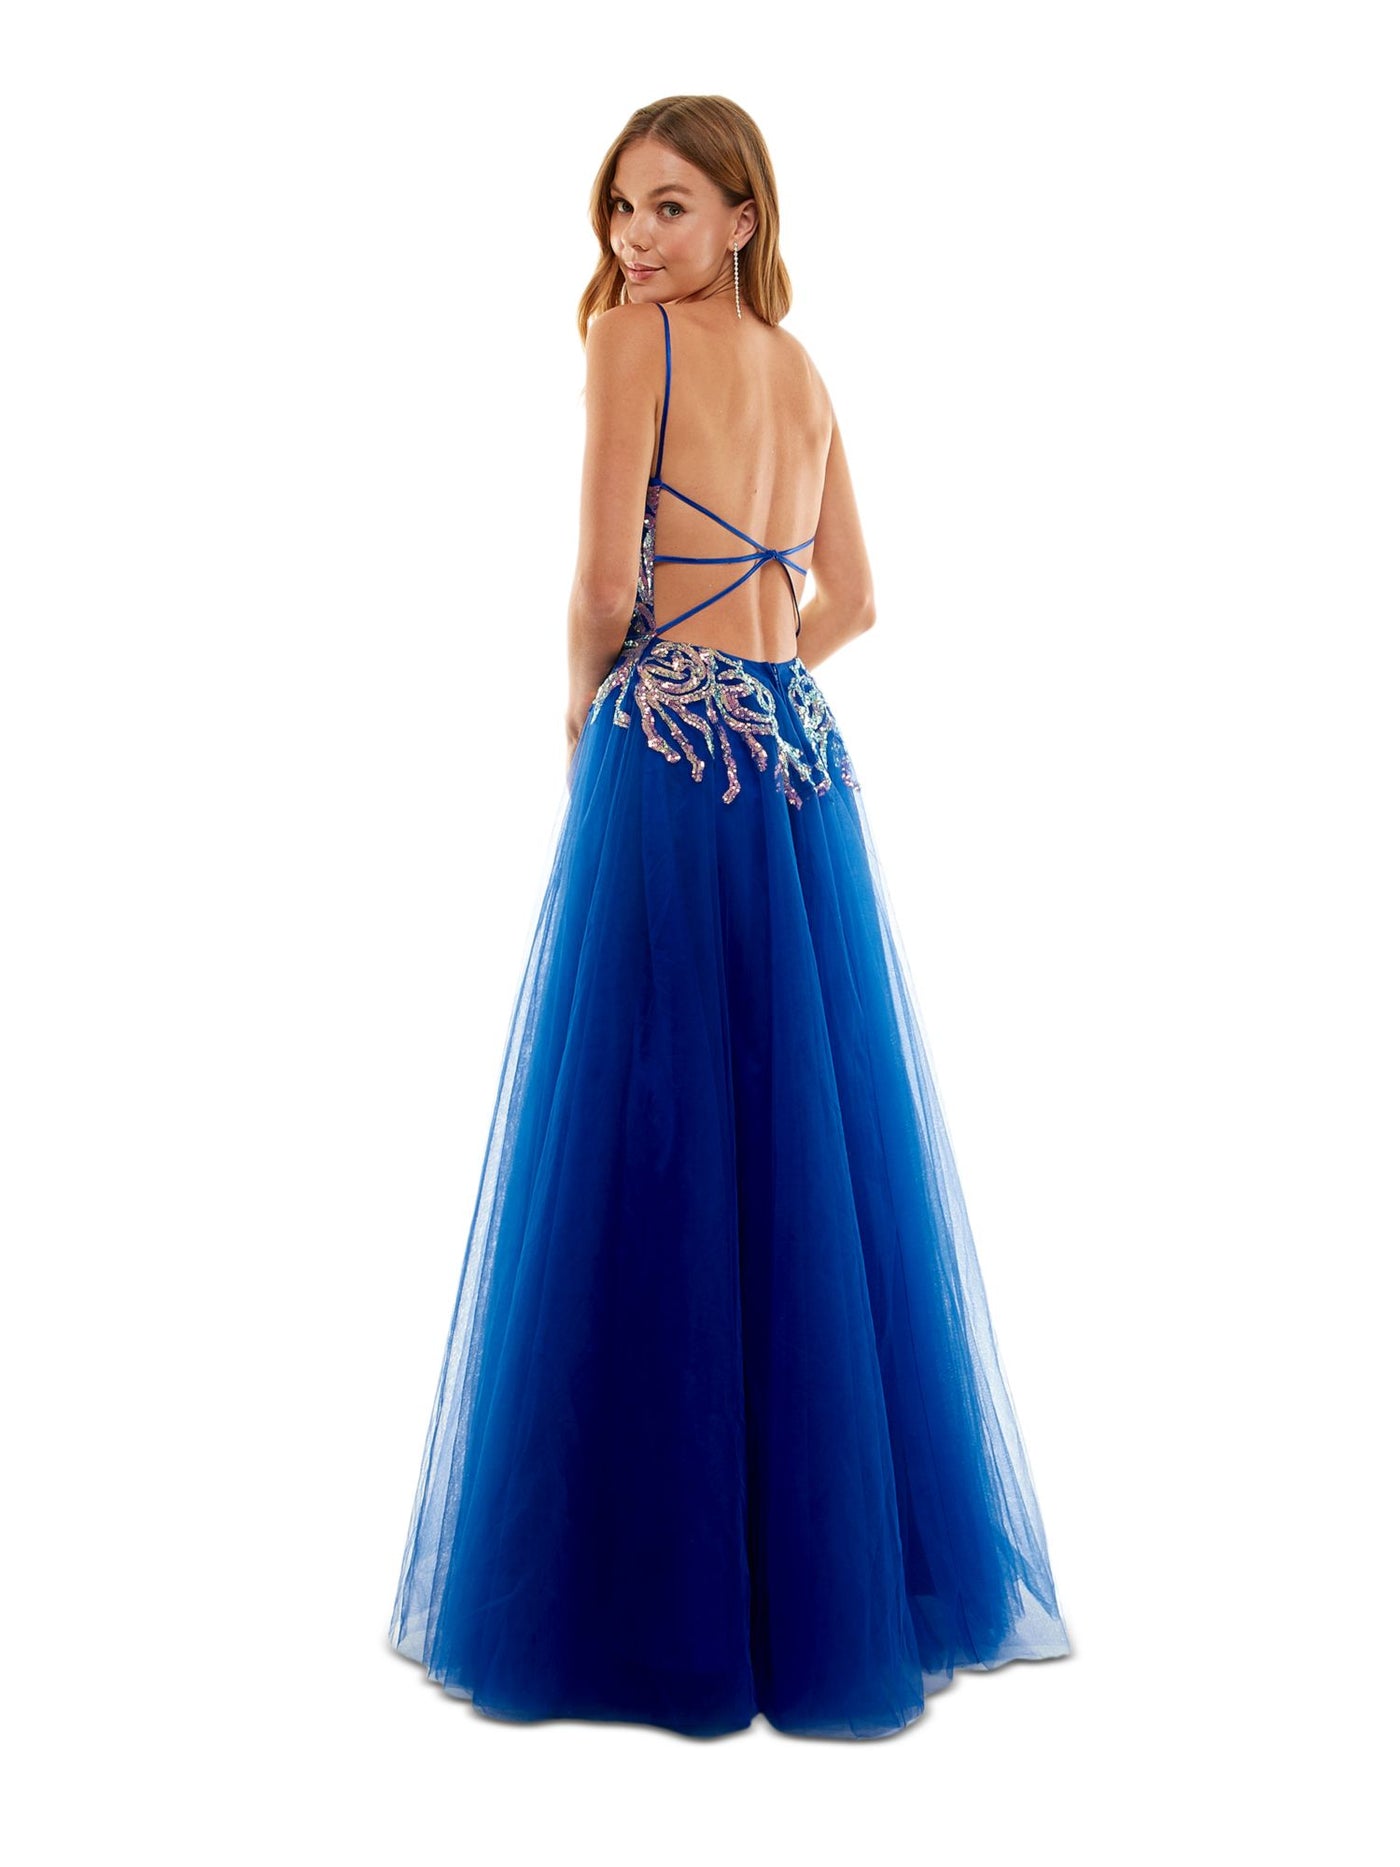 SAY YES TO THE PROM Womens Blue Zippered Lined Mesh Tulle Sheer Lace Up Back Spaghetti Strap V Neck Full-Length Party Gown Dress Juniors 5